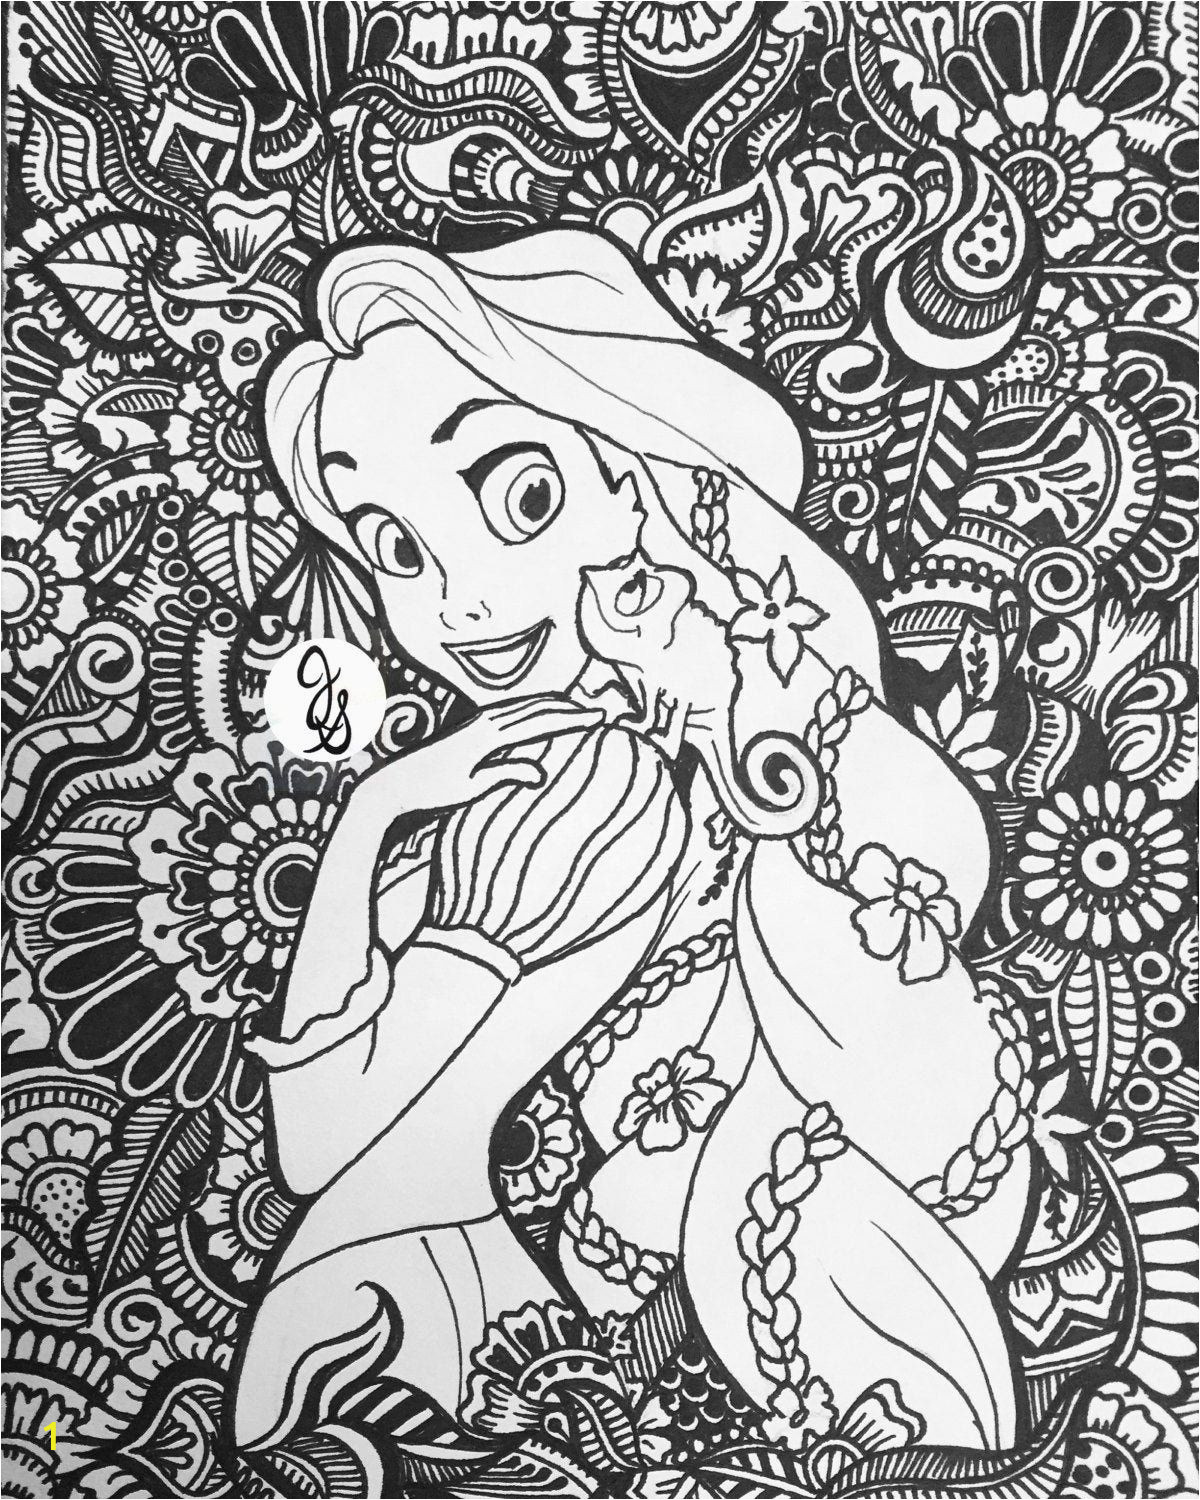 Coloring Pages Disney for Adults Disney Coloring Pages for Adults In 2020